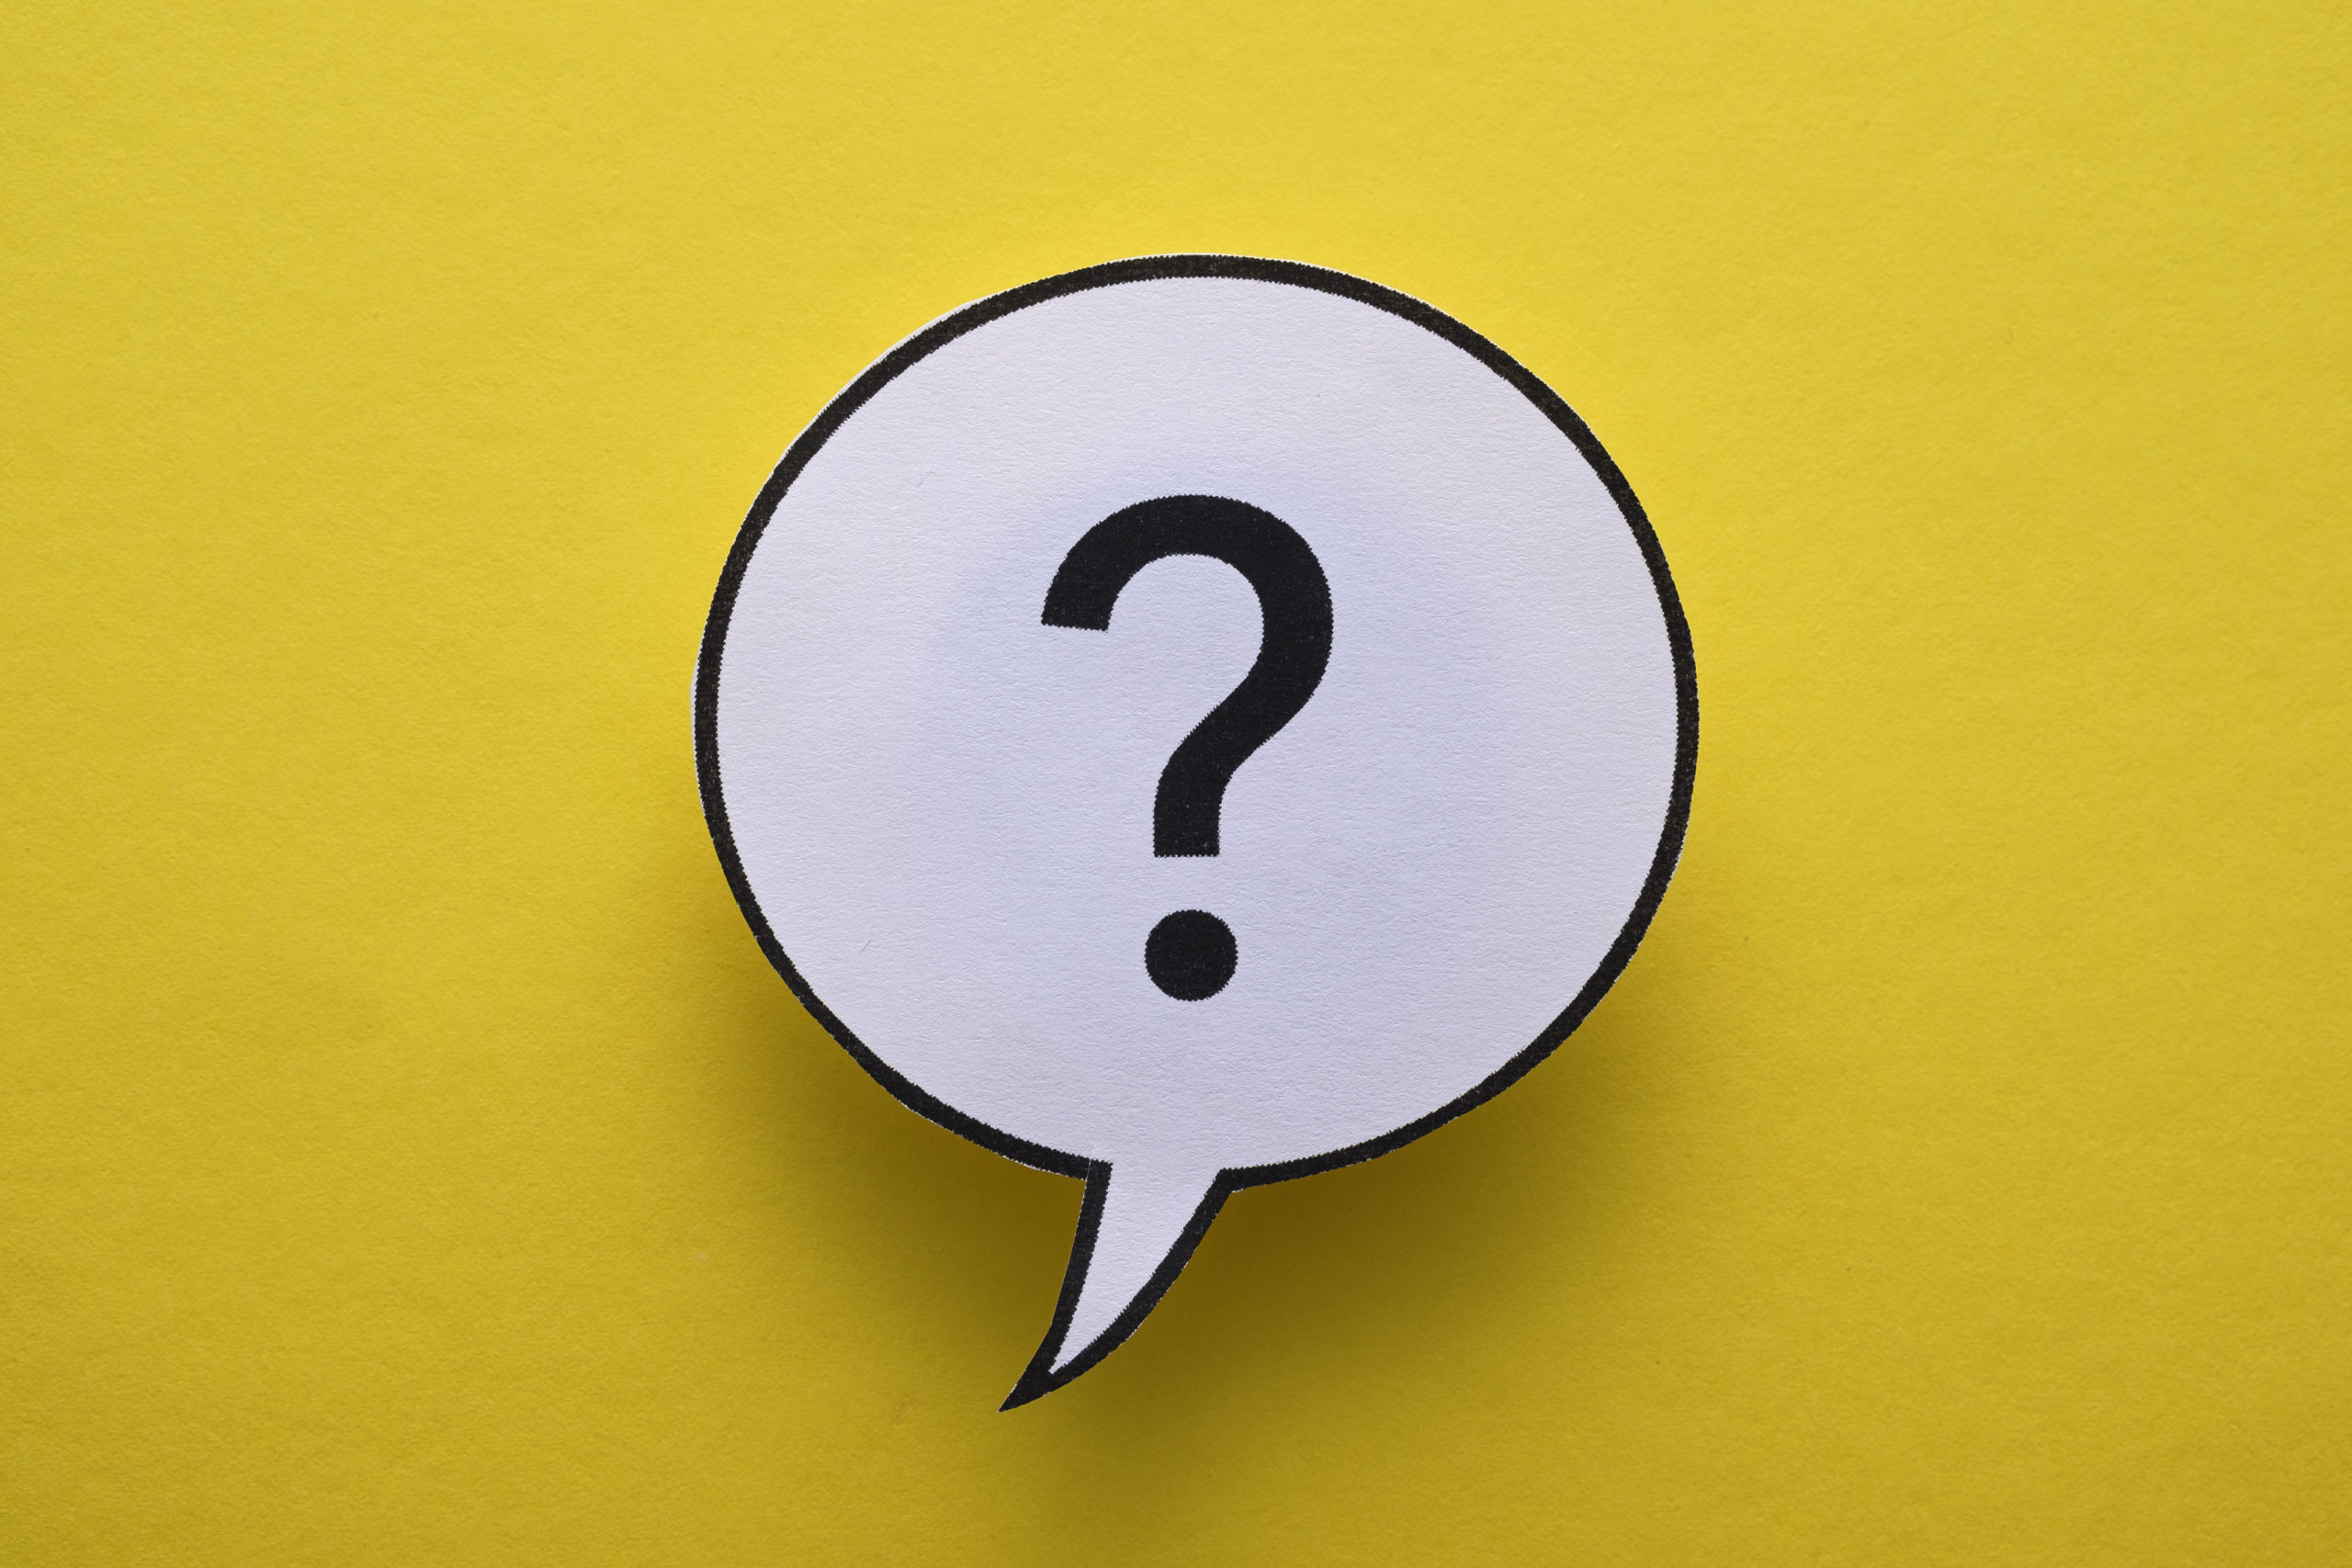 Circular speech or thought bubble with question mark floating over a yellow background with shadow and copyspace